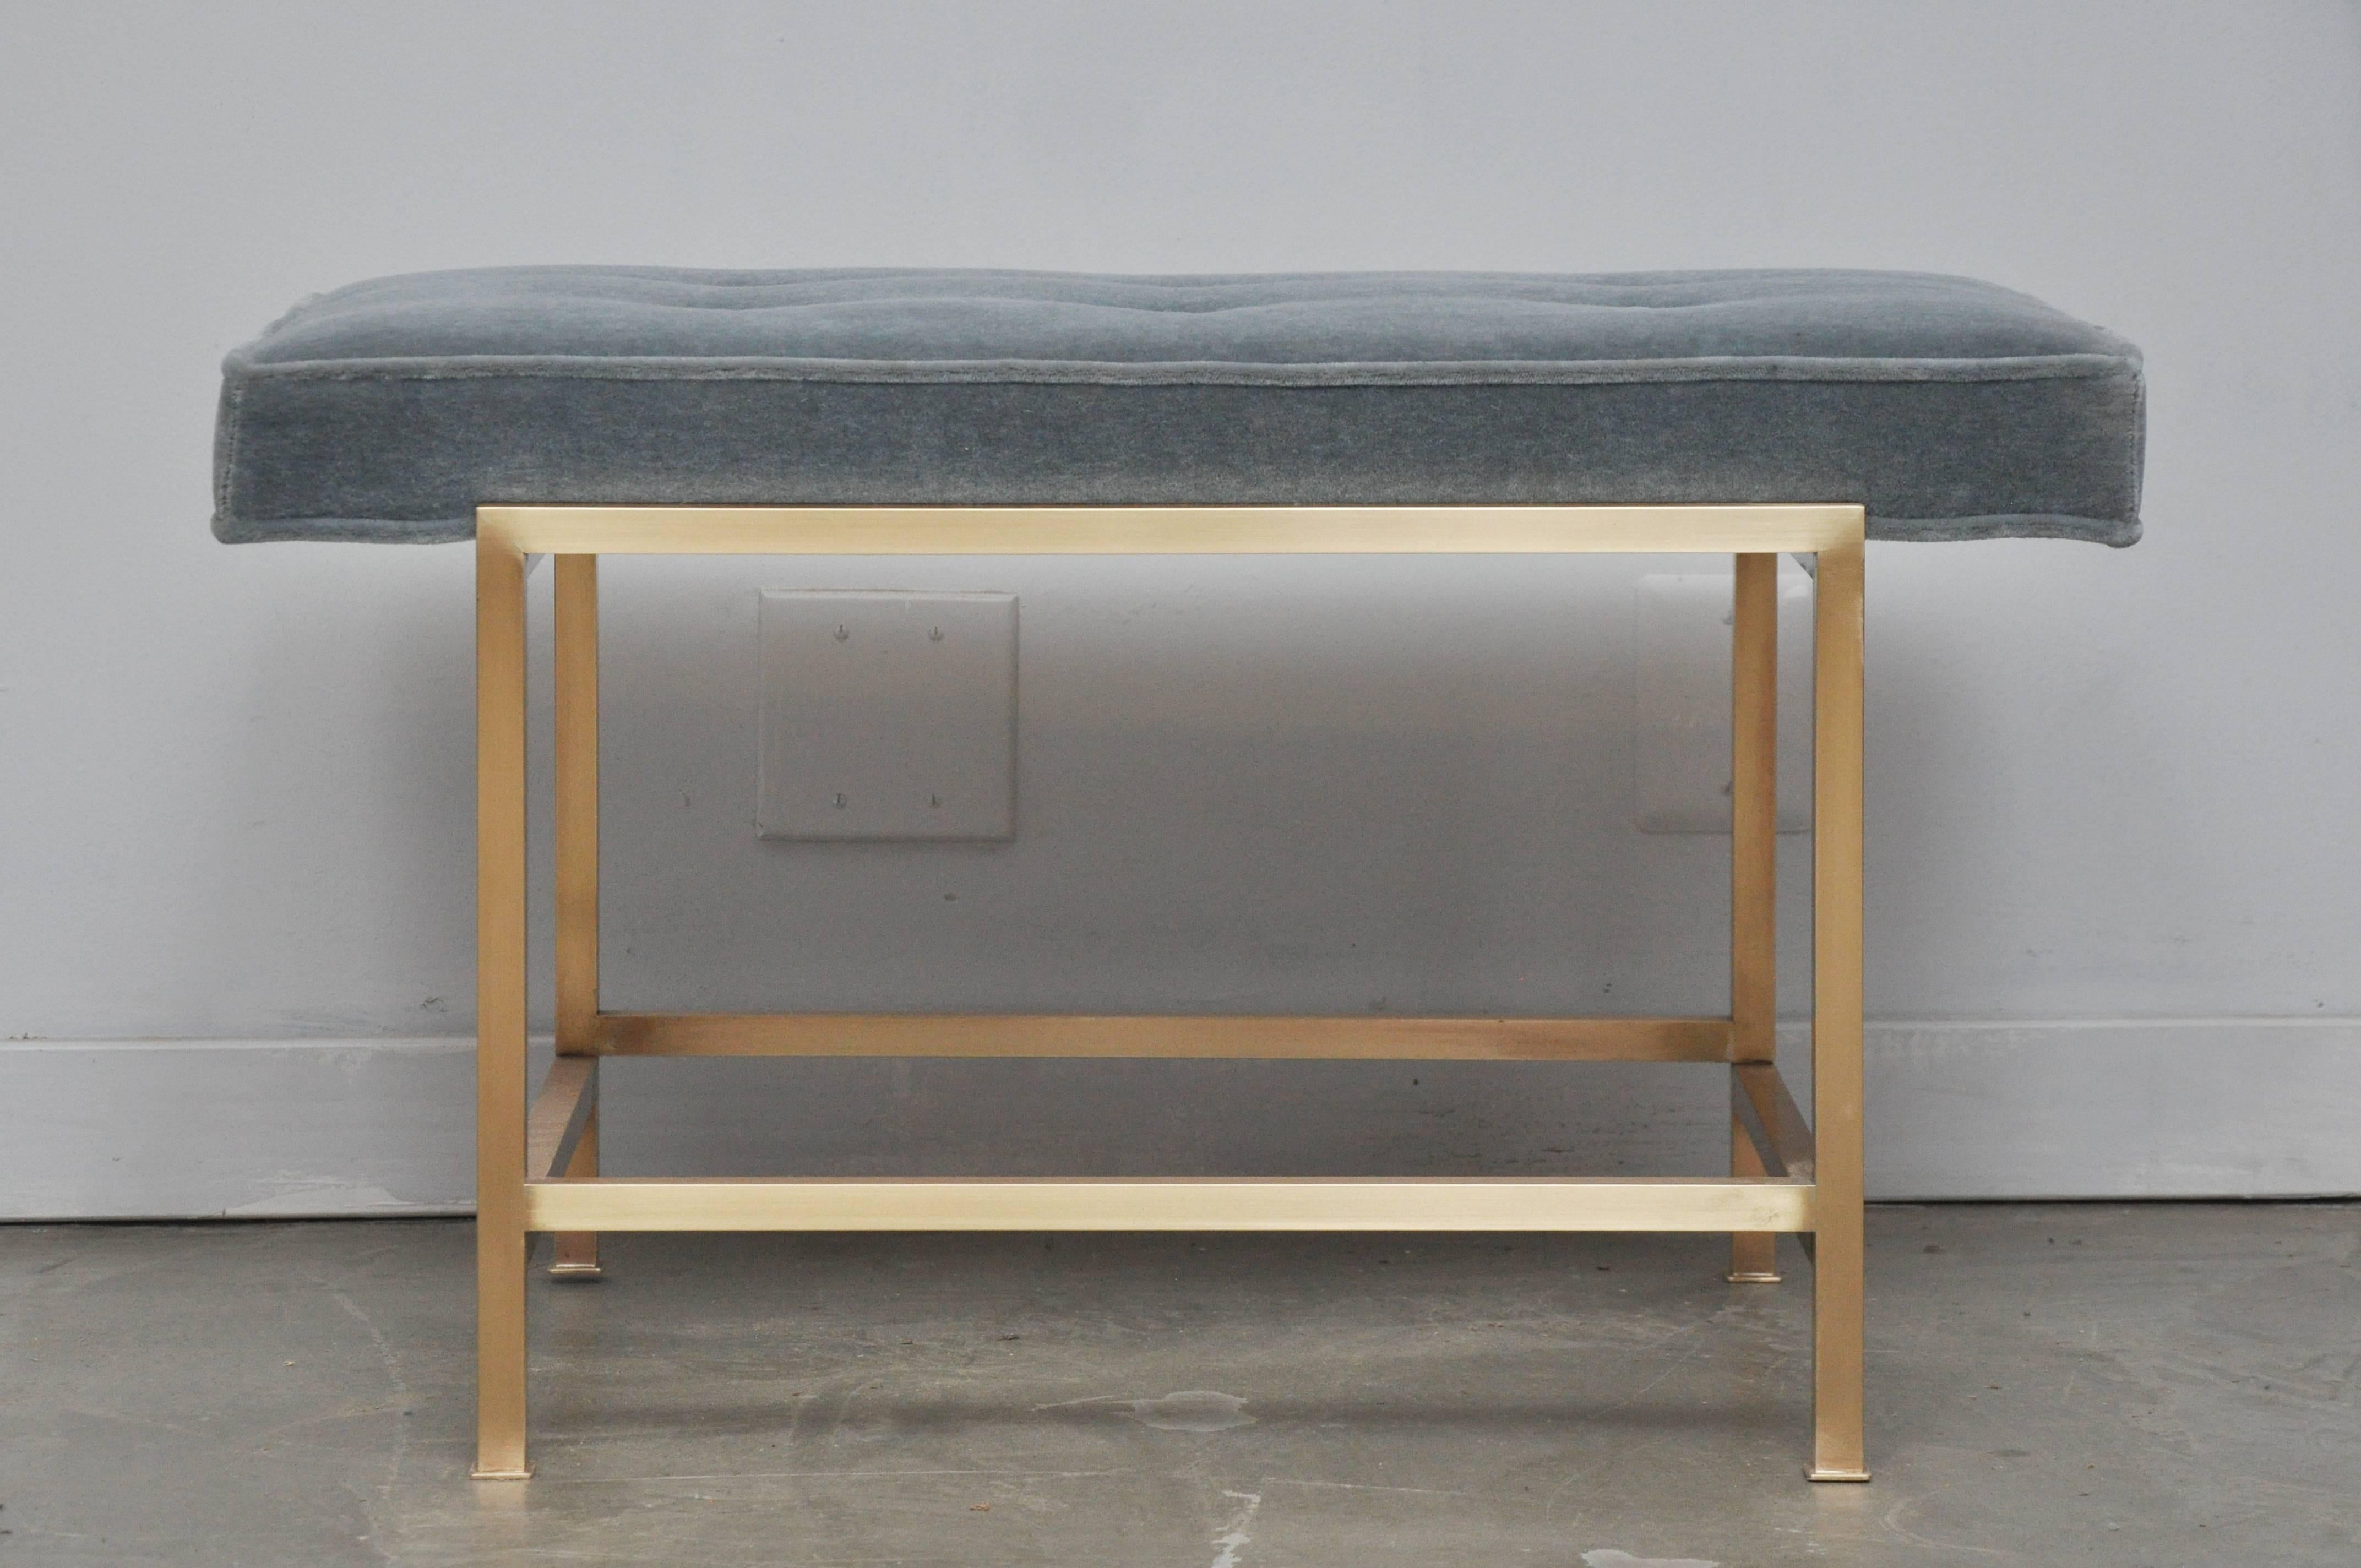 Brass frame bench by Edward Wormley for Dunbar. Fully restored, polished, and reupholstered in mohair.